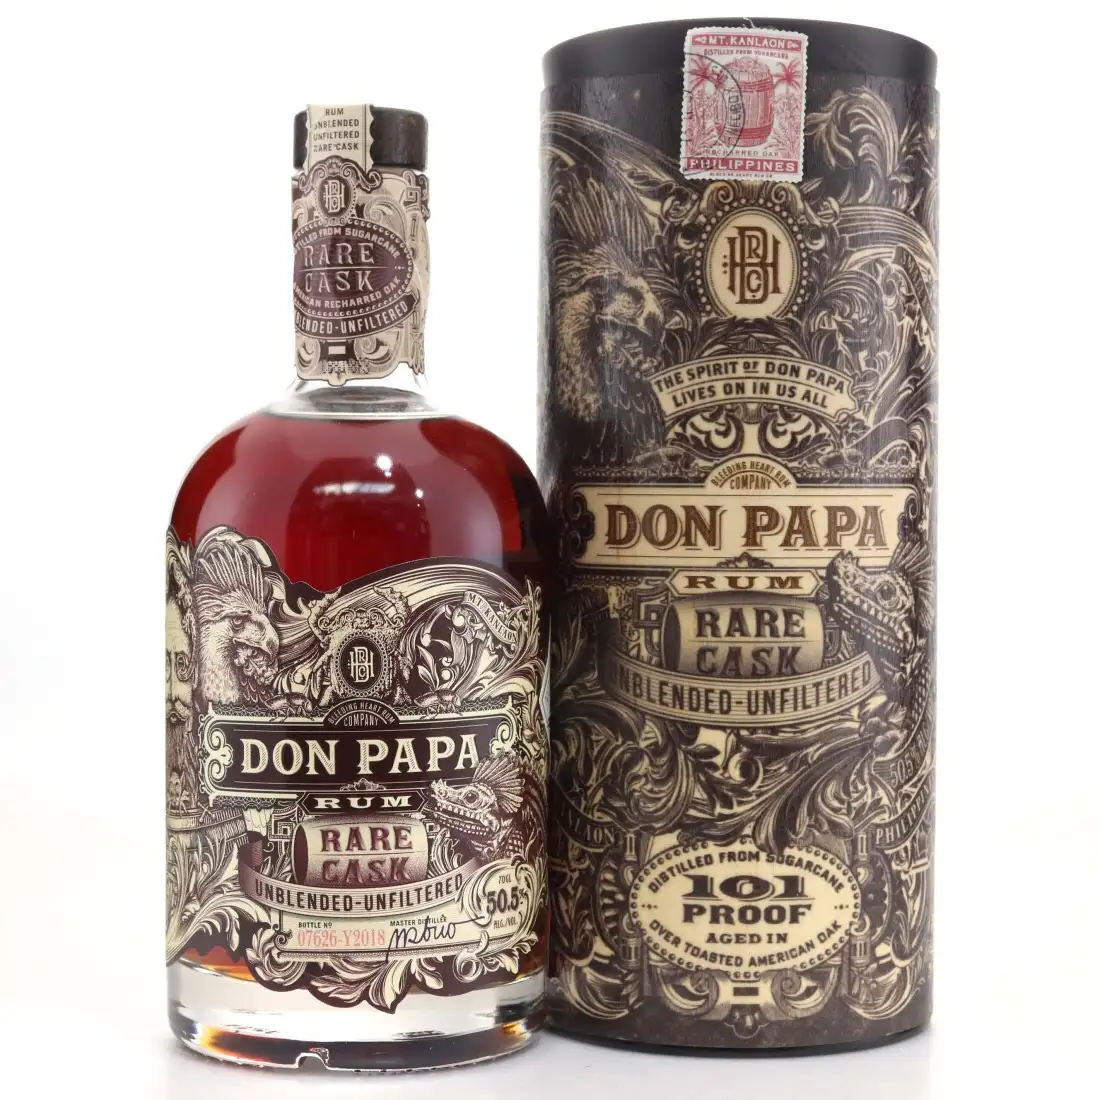 Image of the front of the bottle of the rum Don Papa Rare Cask